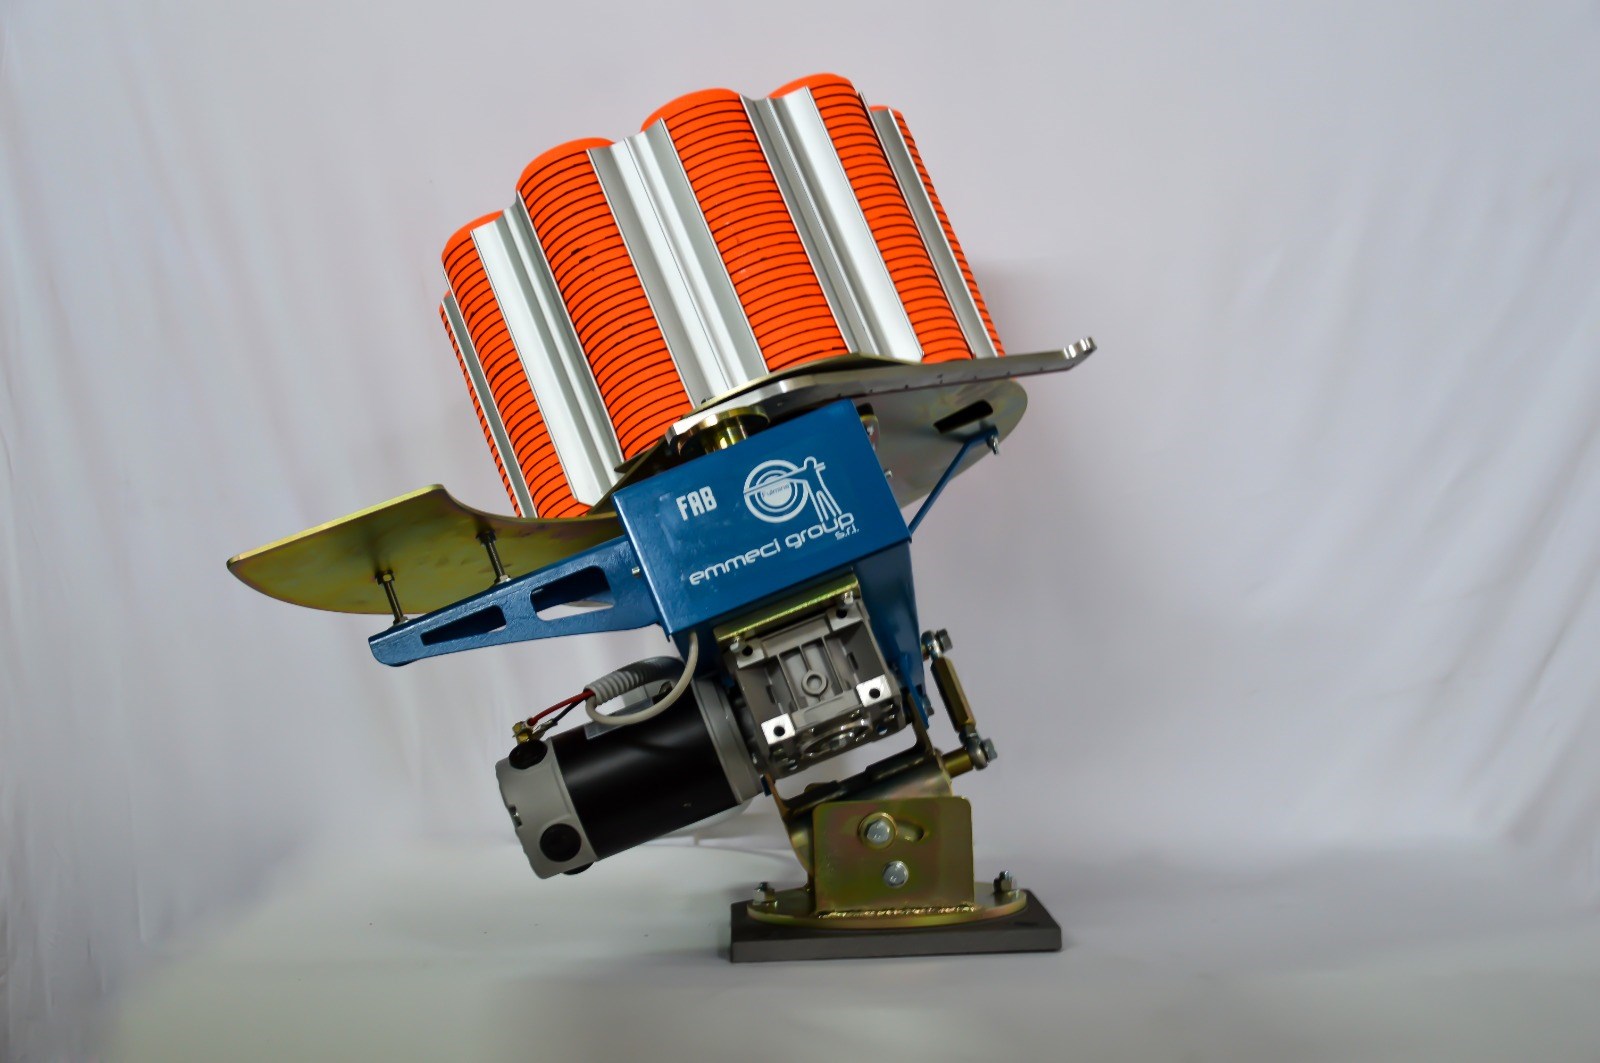 The very popular Sporting Lite 12v, with tilting and turntable base